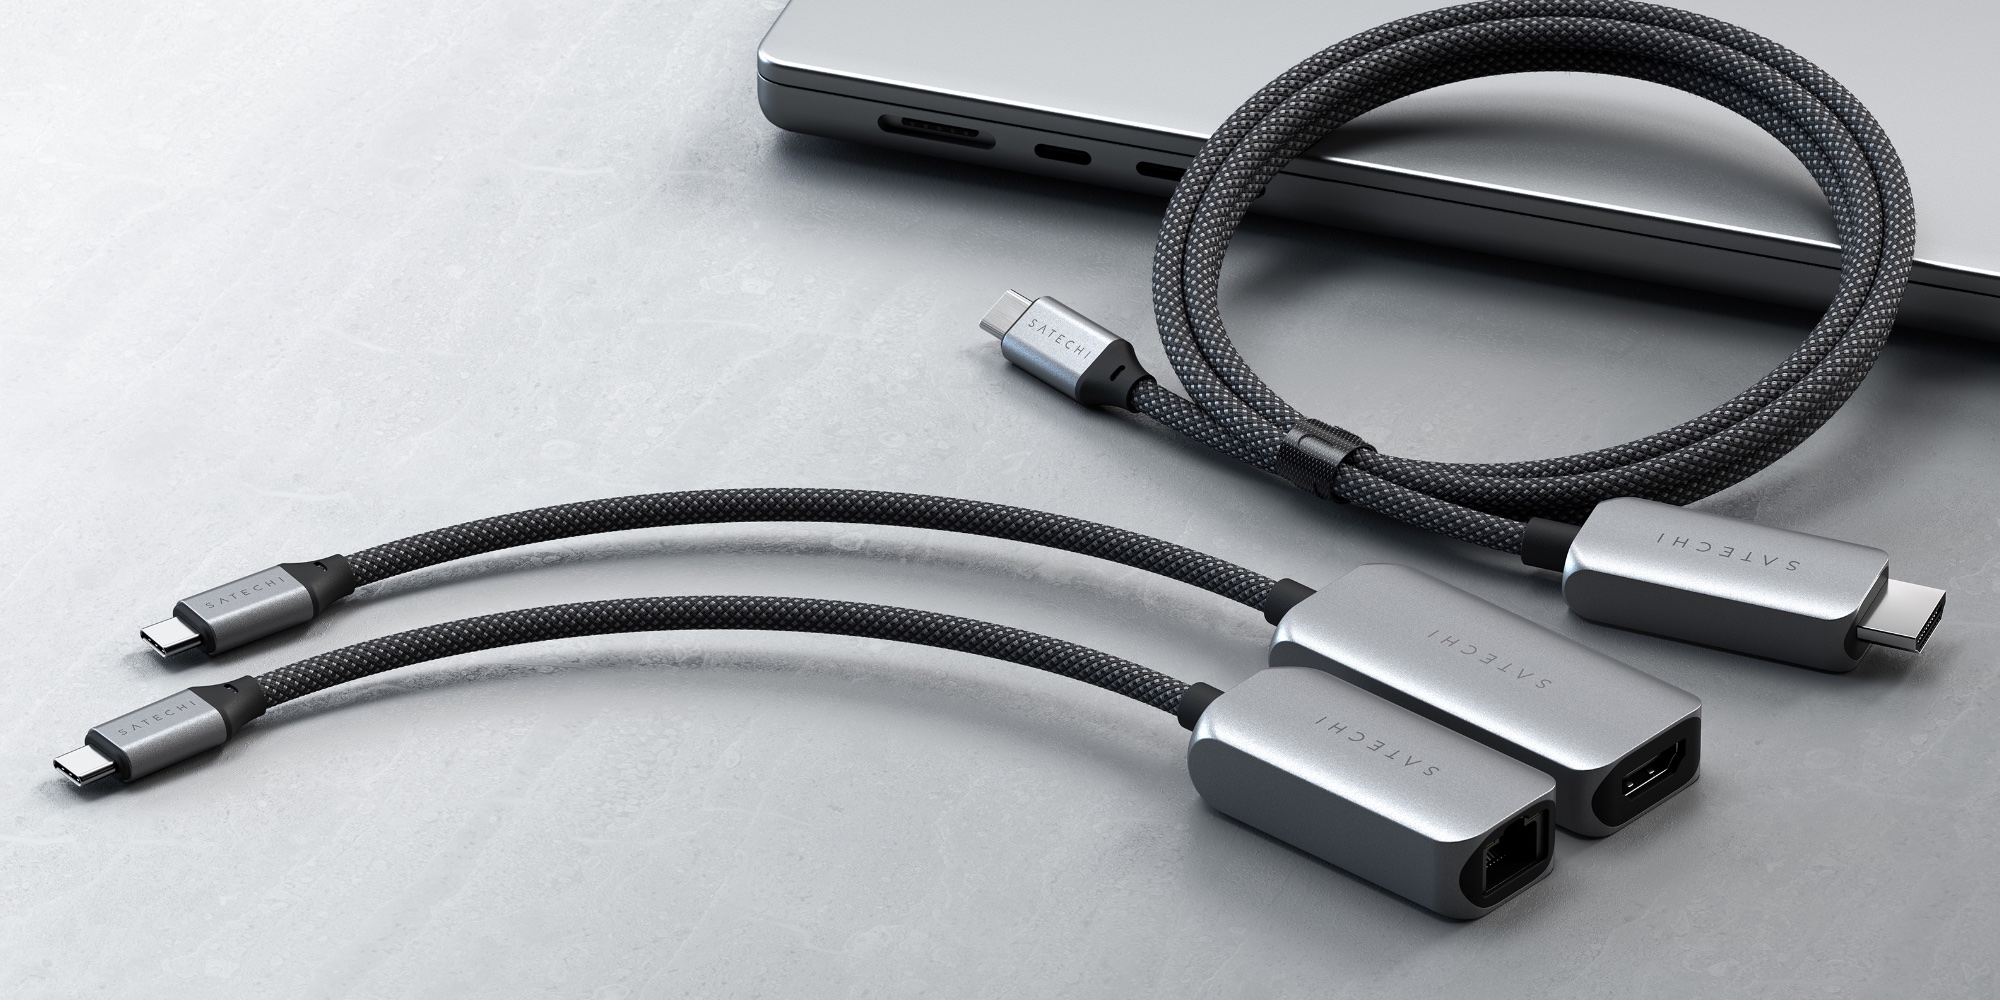 Satechi's USB-C hub can hold an SSD if you have more money than